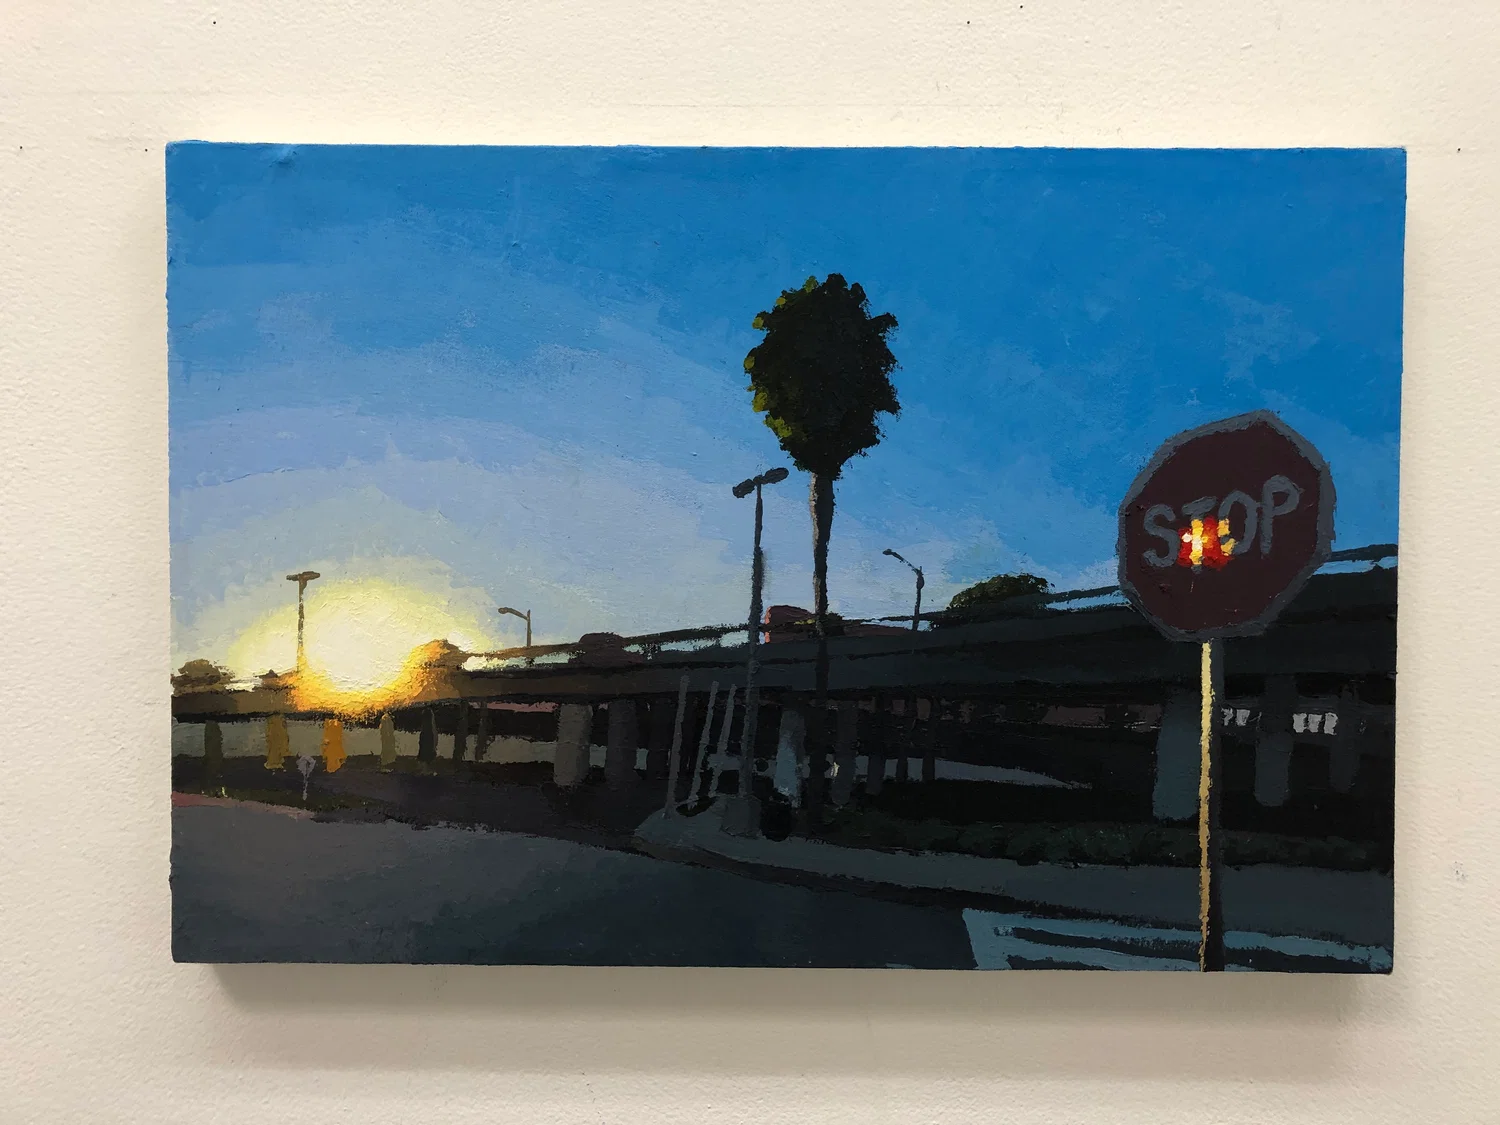 Saul Lopez Hernandez, Culver City Transit Center to Church, 2024, Acrylic on Canvas, 20 inches x 30 inches x 1 inch